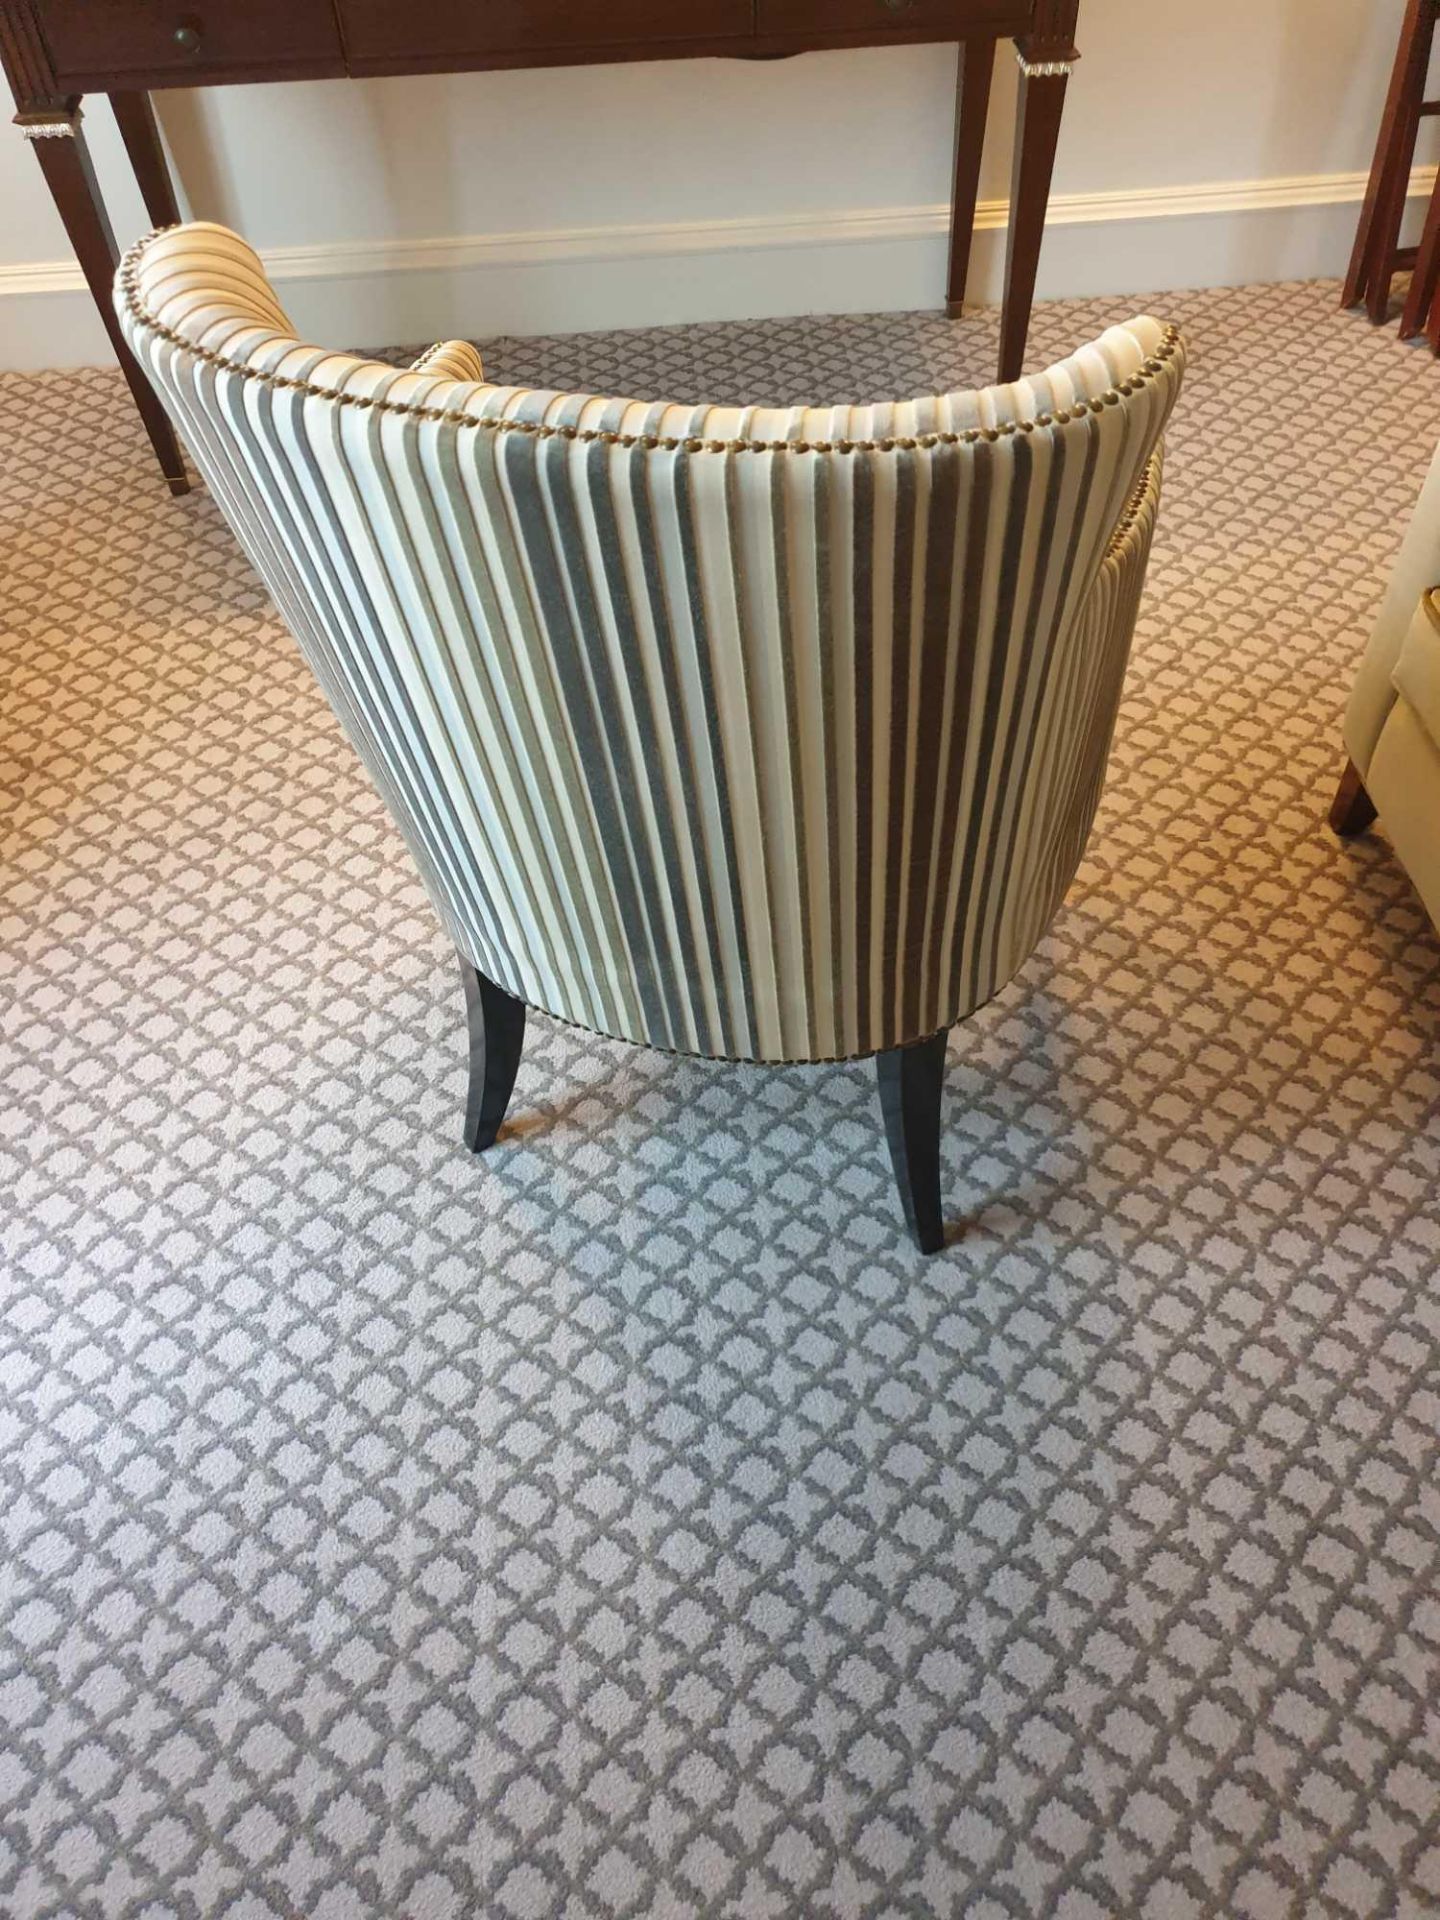 Accent Chair In Upholstered Striped Fabric 65 x 49 x 84cm (Room 704 & 705) - Image 3 of 3